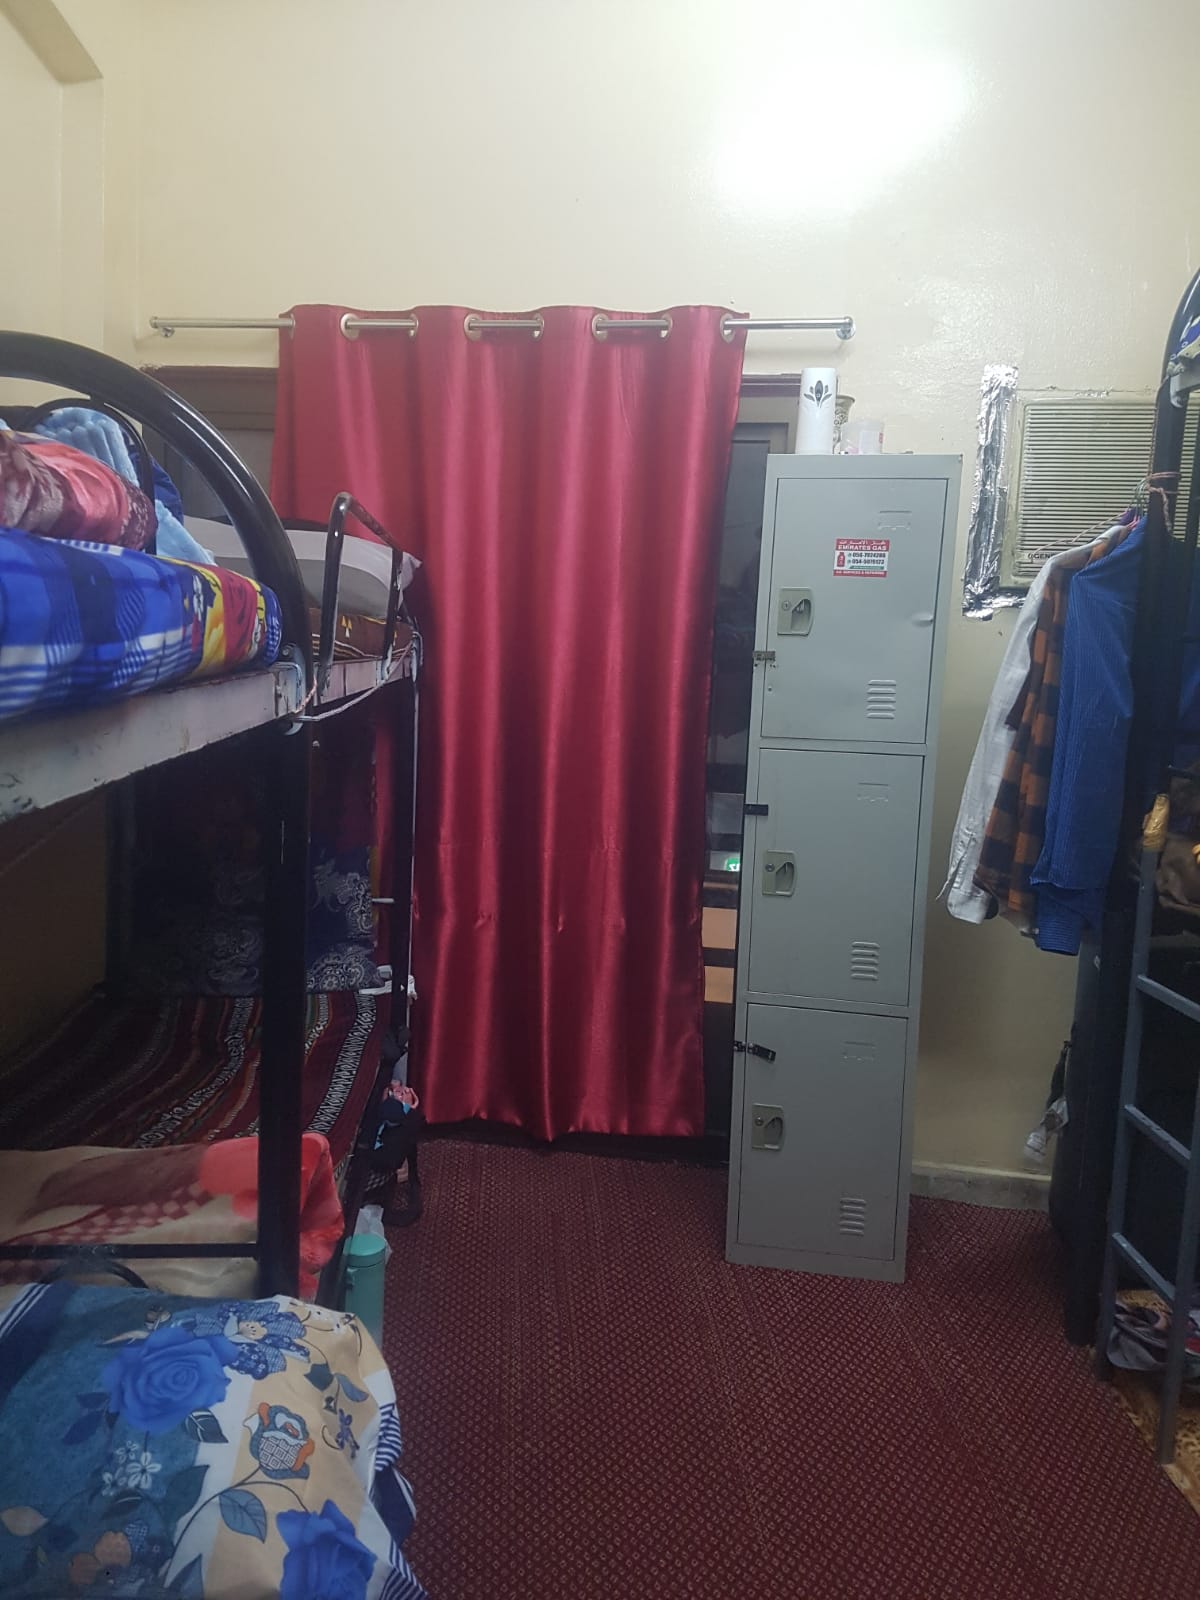 EXECUTIVE BED SPACE FOR MALE/ FEMALE FROM 650 ONWARDS NEAR UNION/